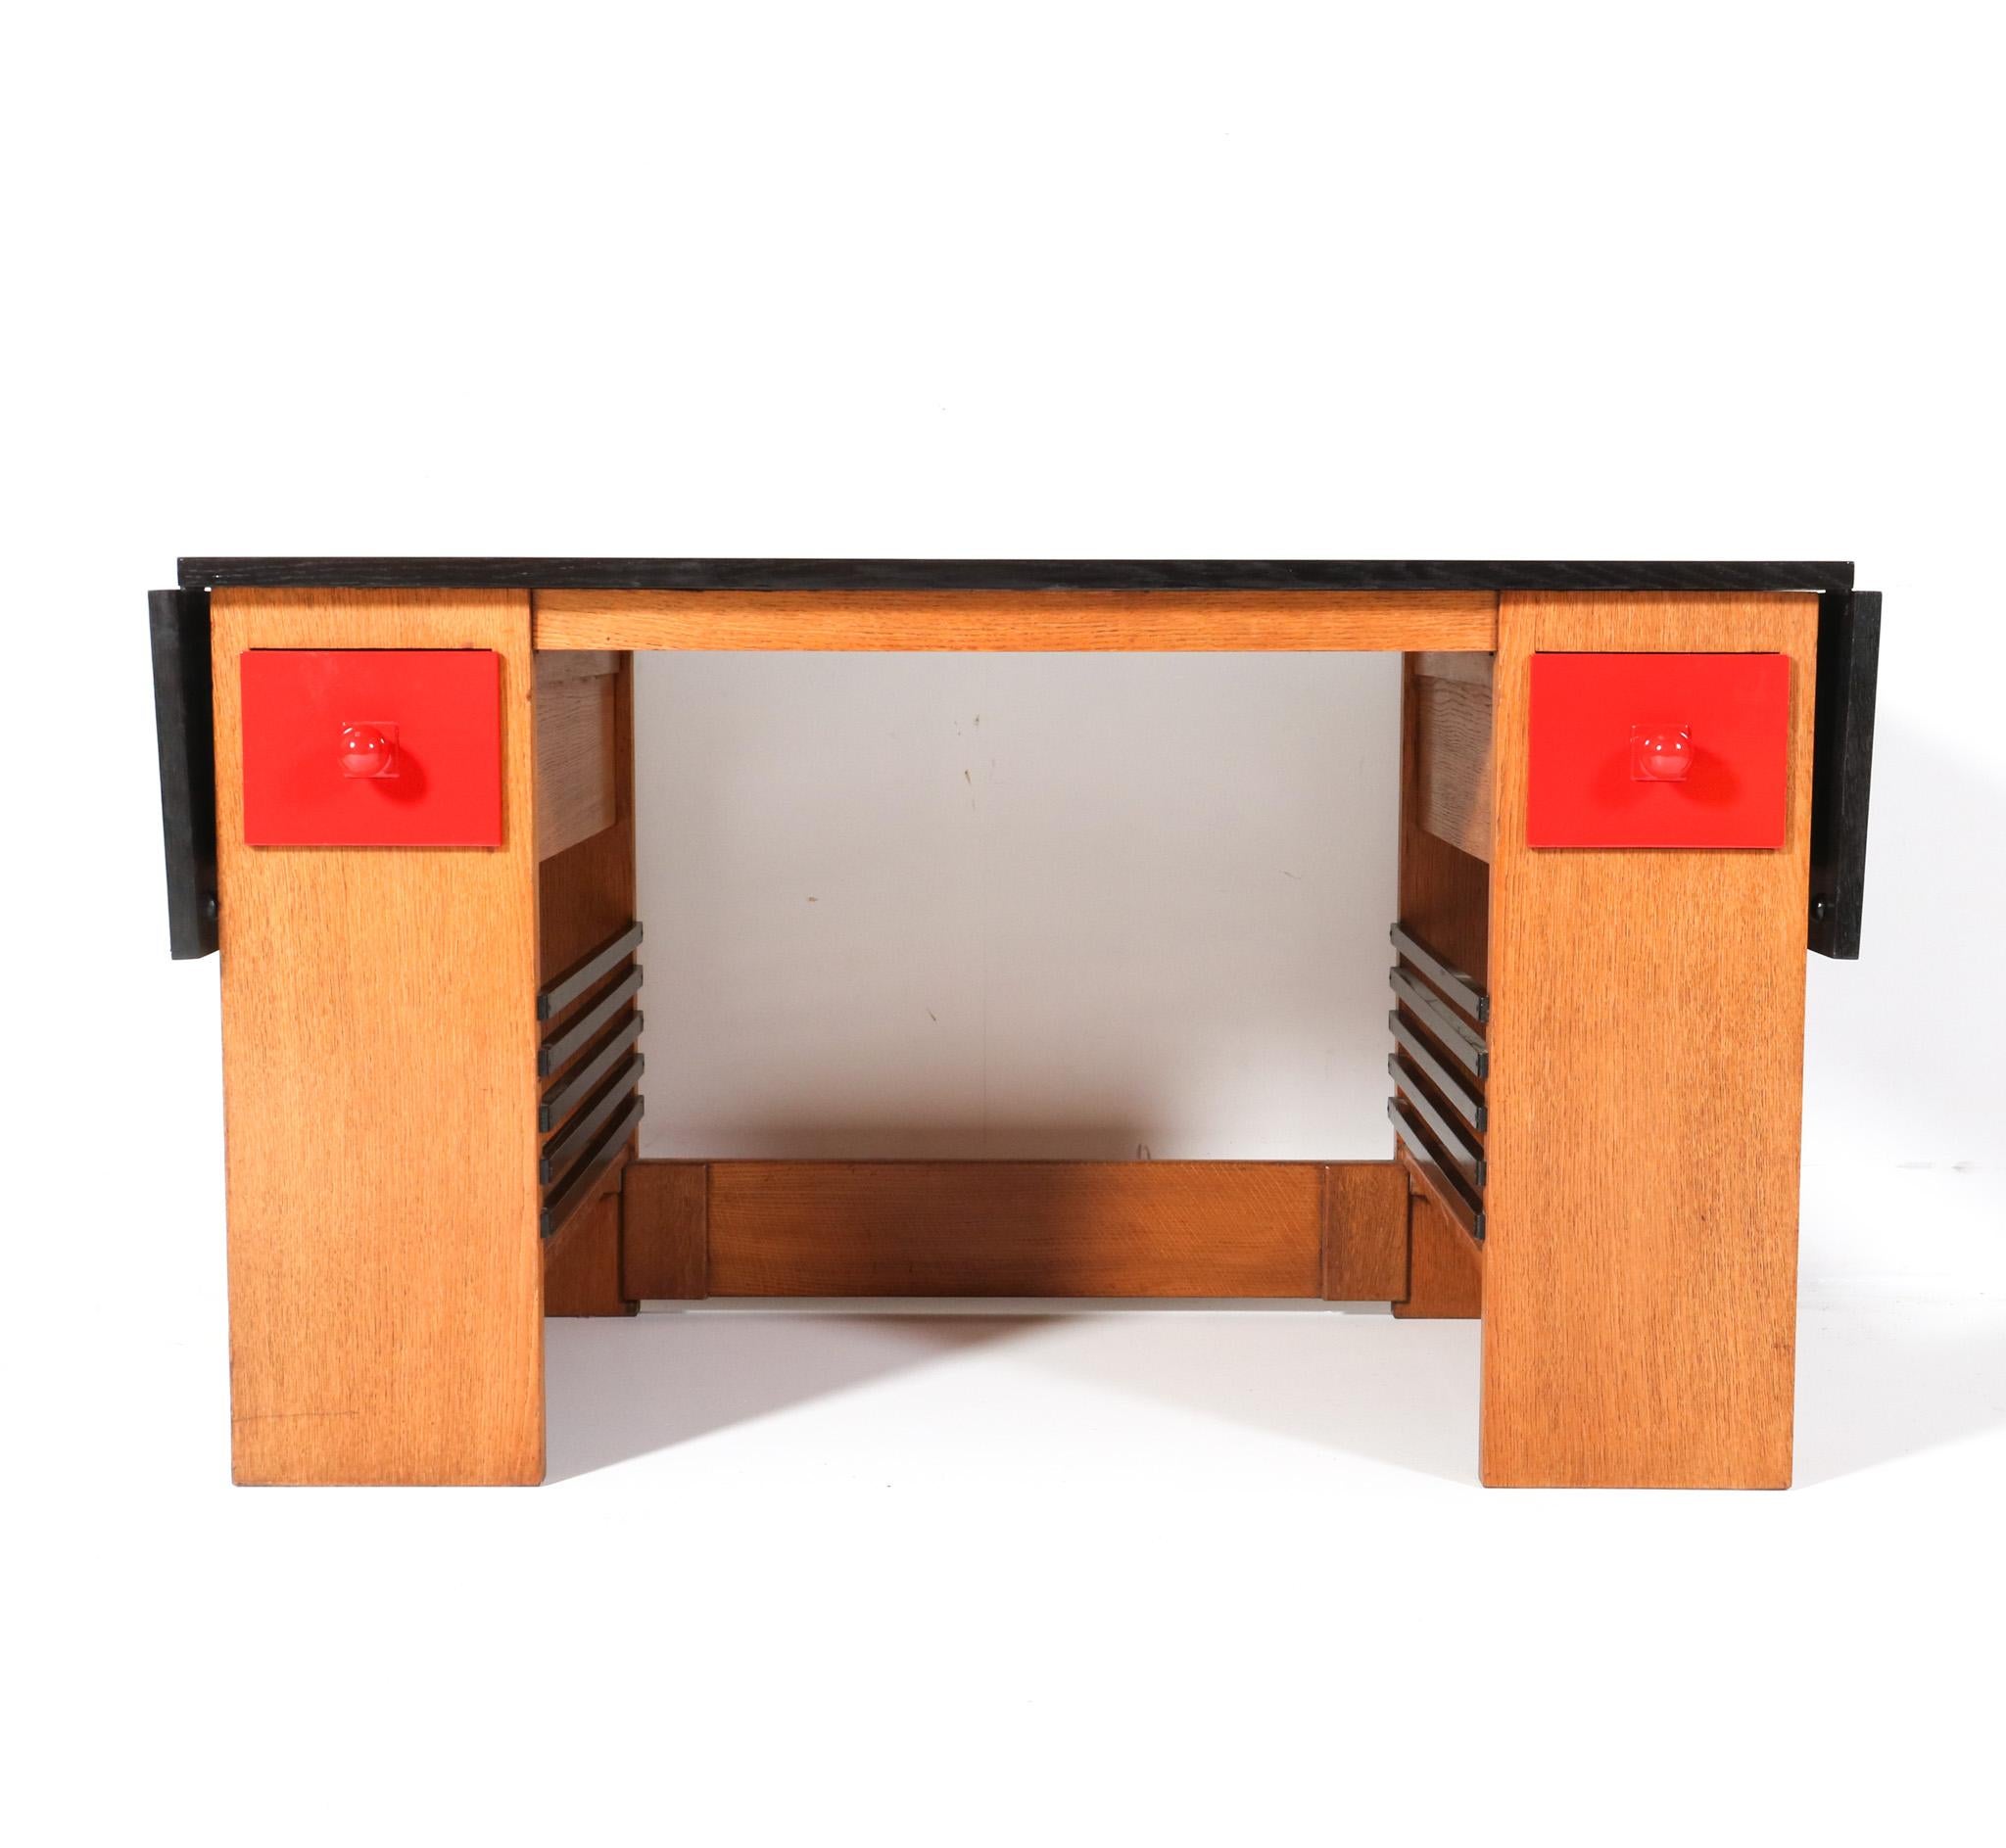 Magnificent and ultra rare Art Deco Modernist desk or writing table.
Design by Hendrik Wouda for H. Pander & Zonen Den Haag.
Striking Dutch design from the 1920s.
Solid oak base with original red lacquered drawers and original black lacquered